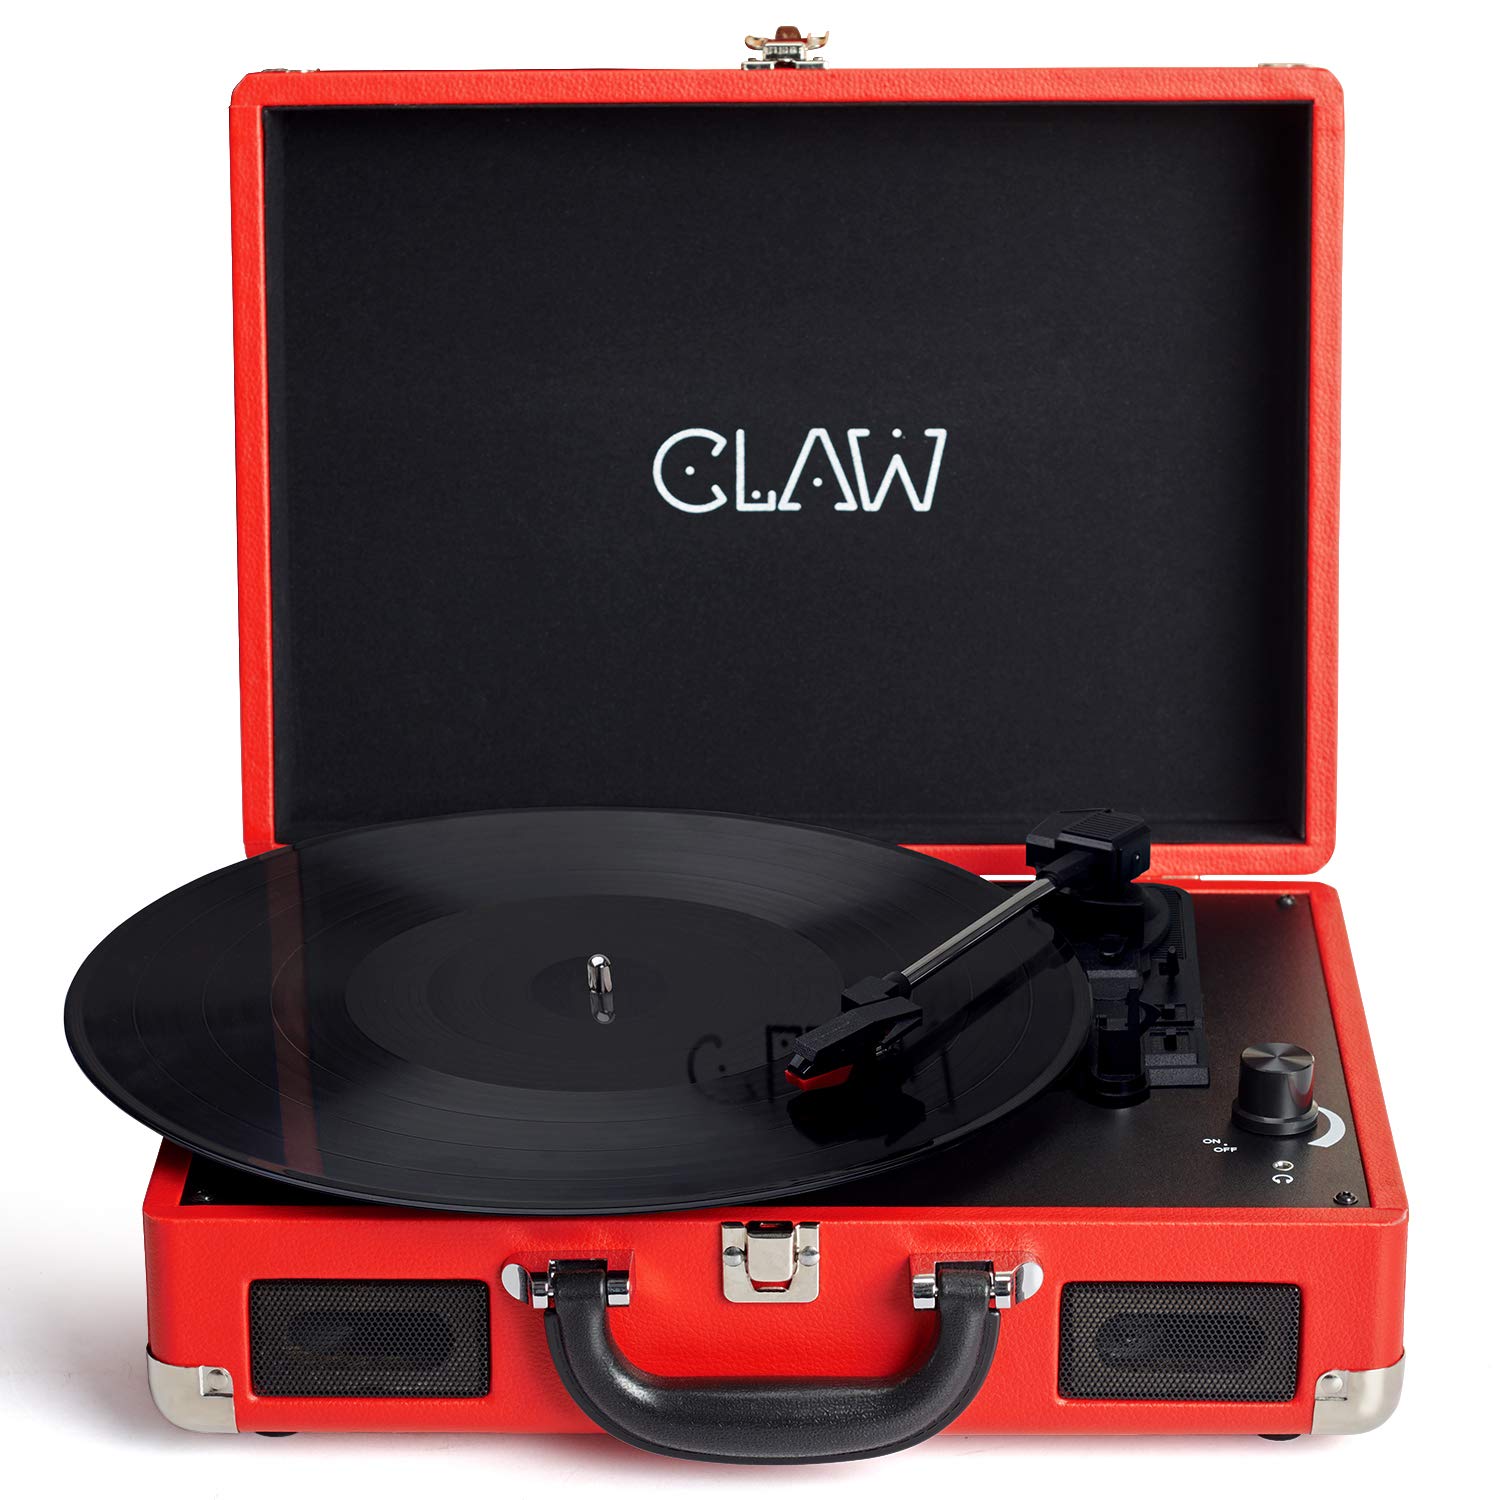 CLAW Stag Portable - Turntable with Built-in Stereo Speakers (Red) (Use Code Origin5 to Get 5% Discount)